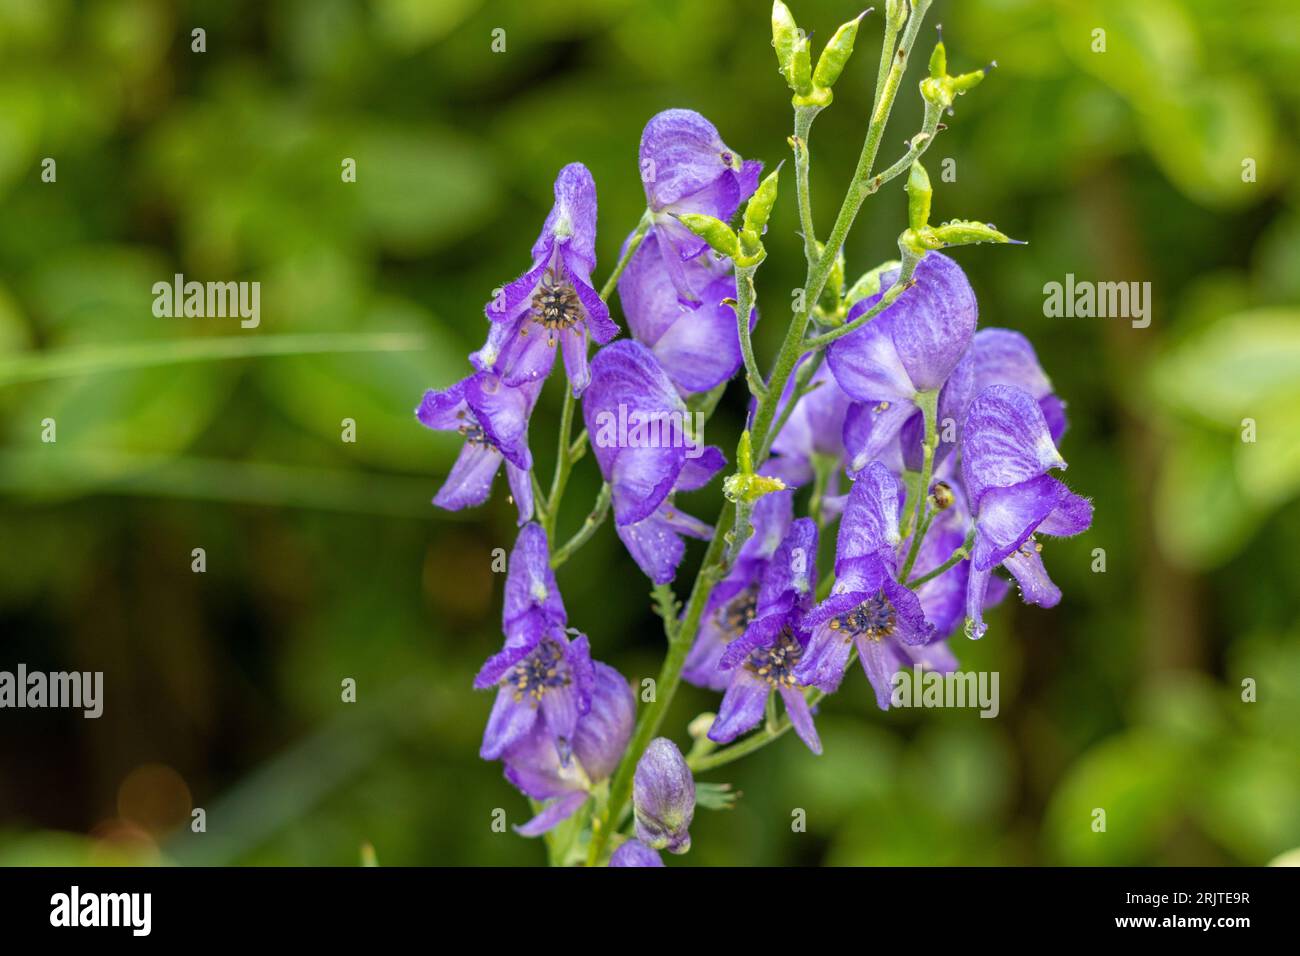 A close-up shot of a group of Rittersporn Delphinum flowers in full bloom, growing on a thin stem against a backdrop of a leafy bush Stock Photo